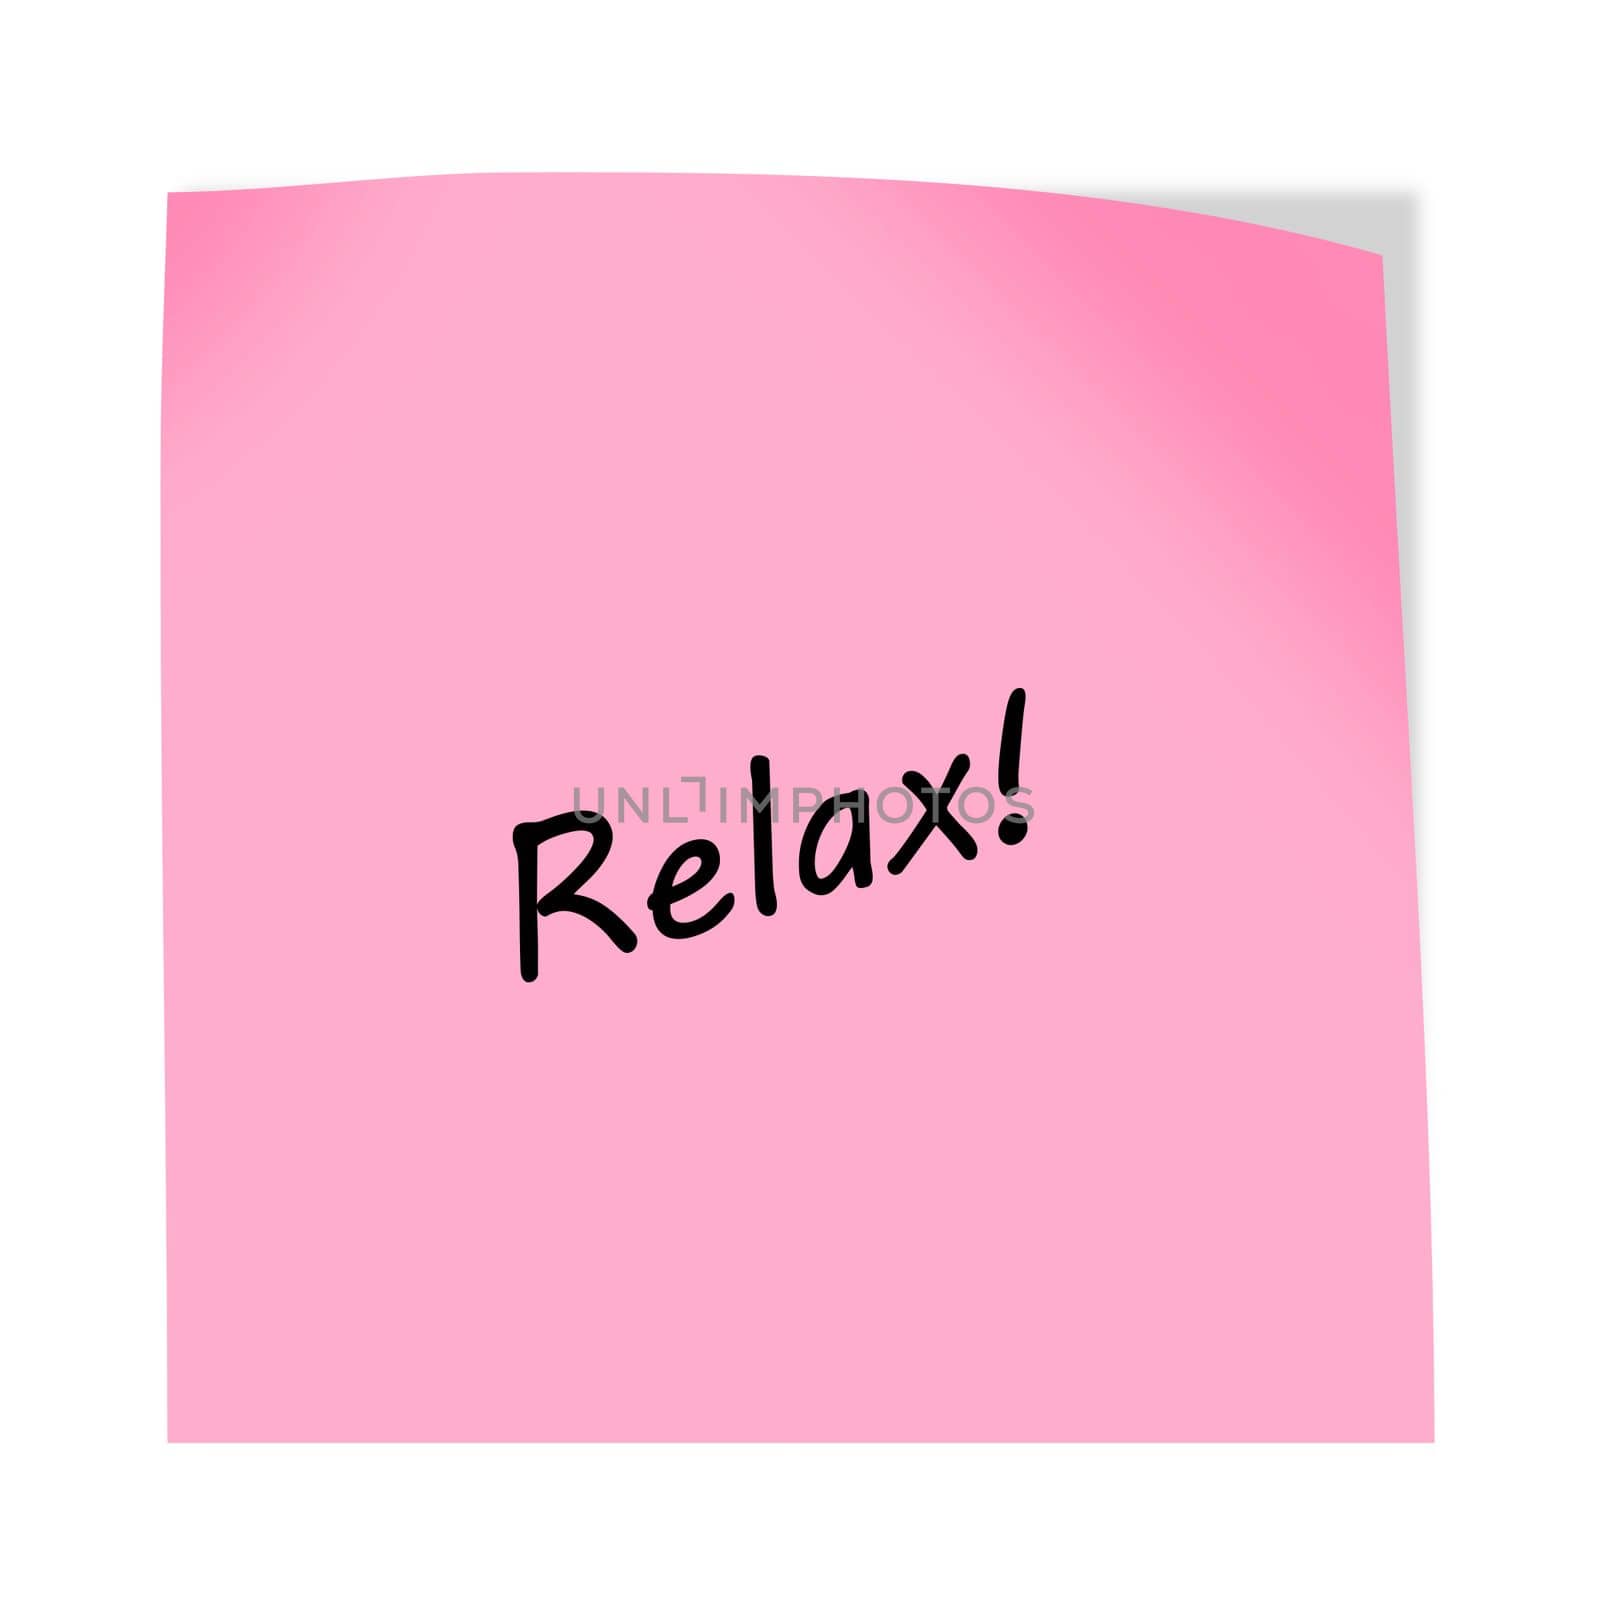 A Relax 3d illustration post note reminder on white with clipping path